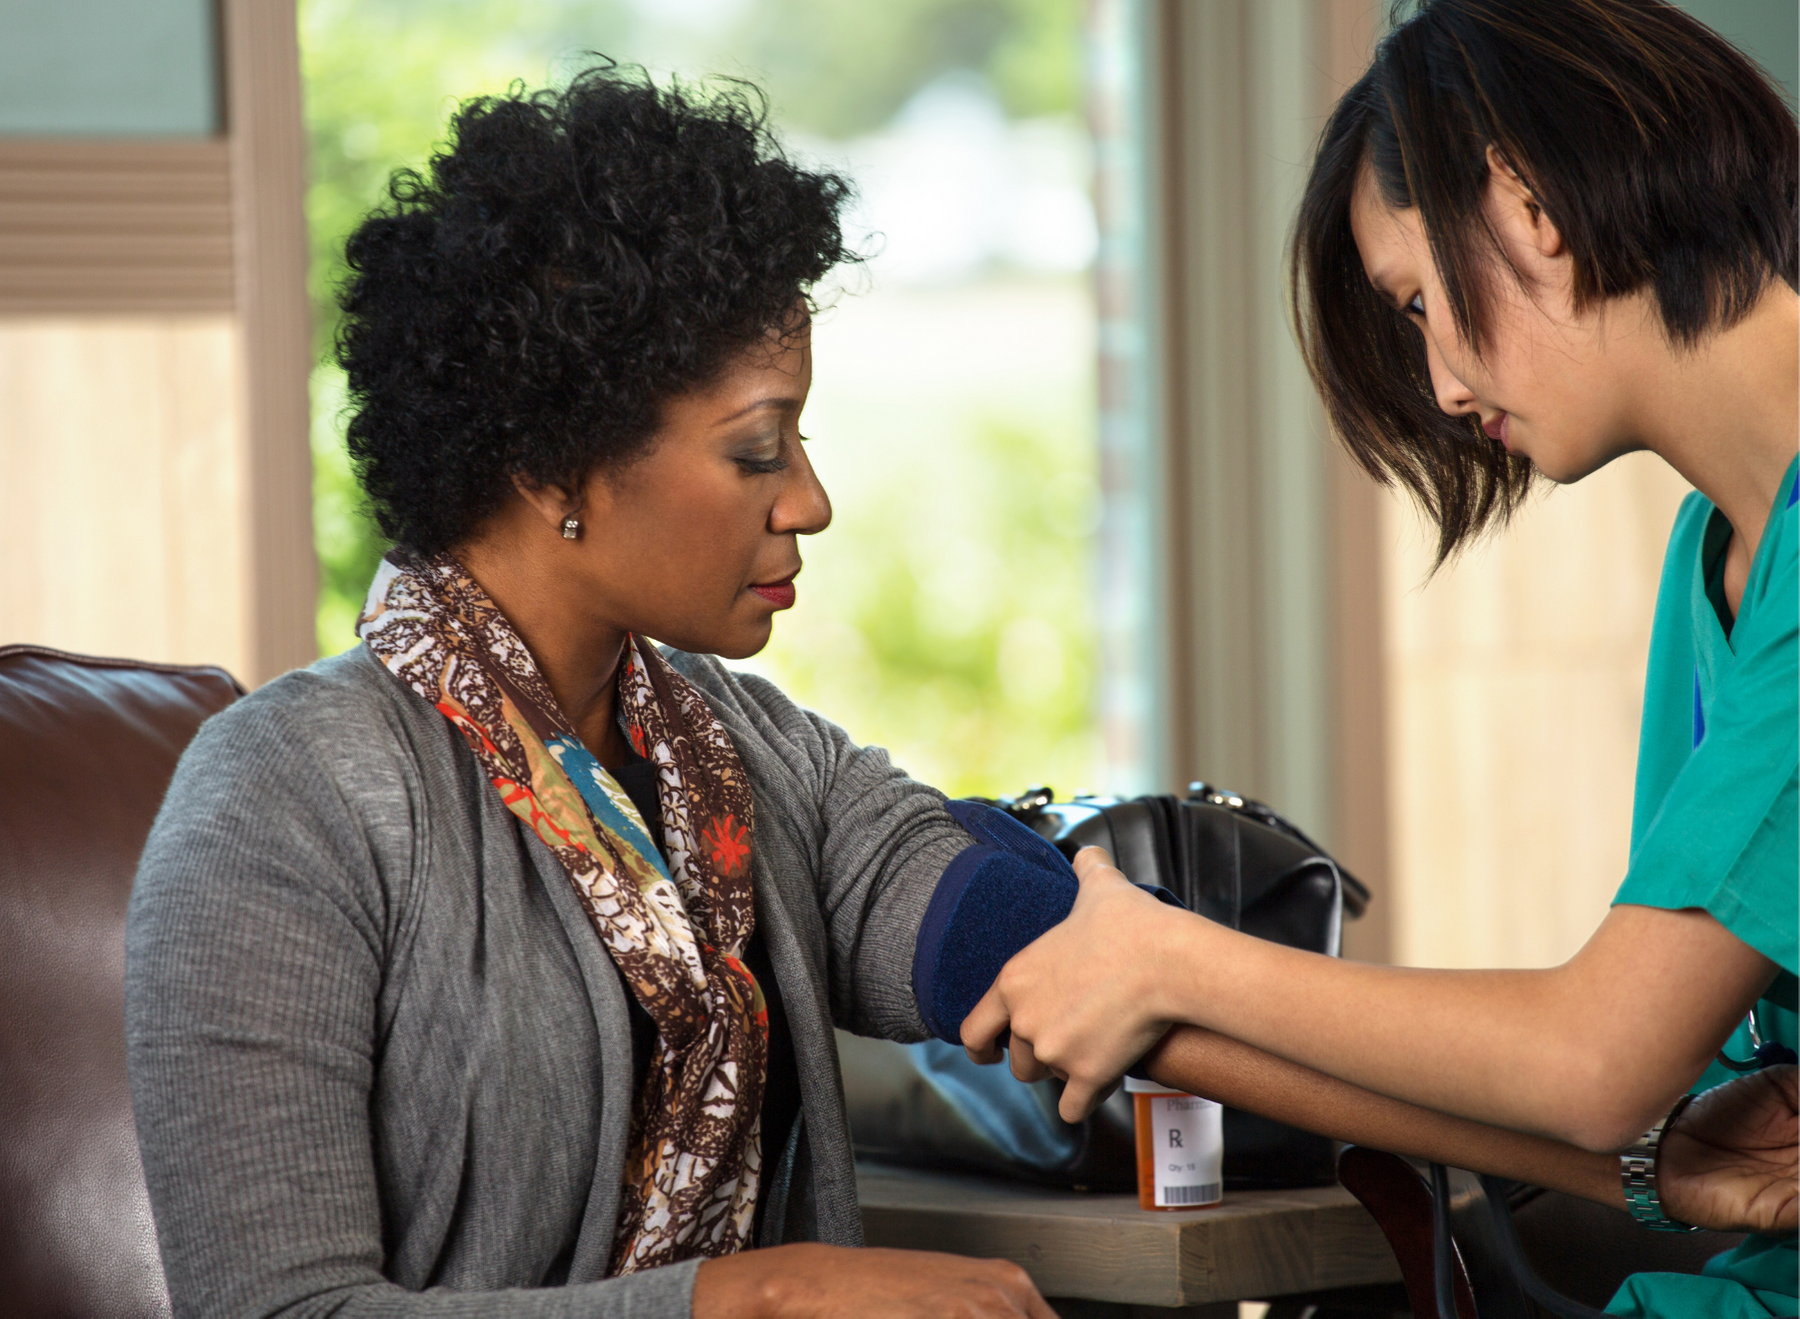 Hypertension Interventions Have Limited Success in Rural Black Populations